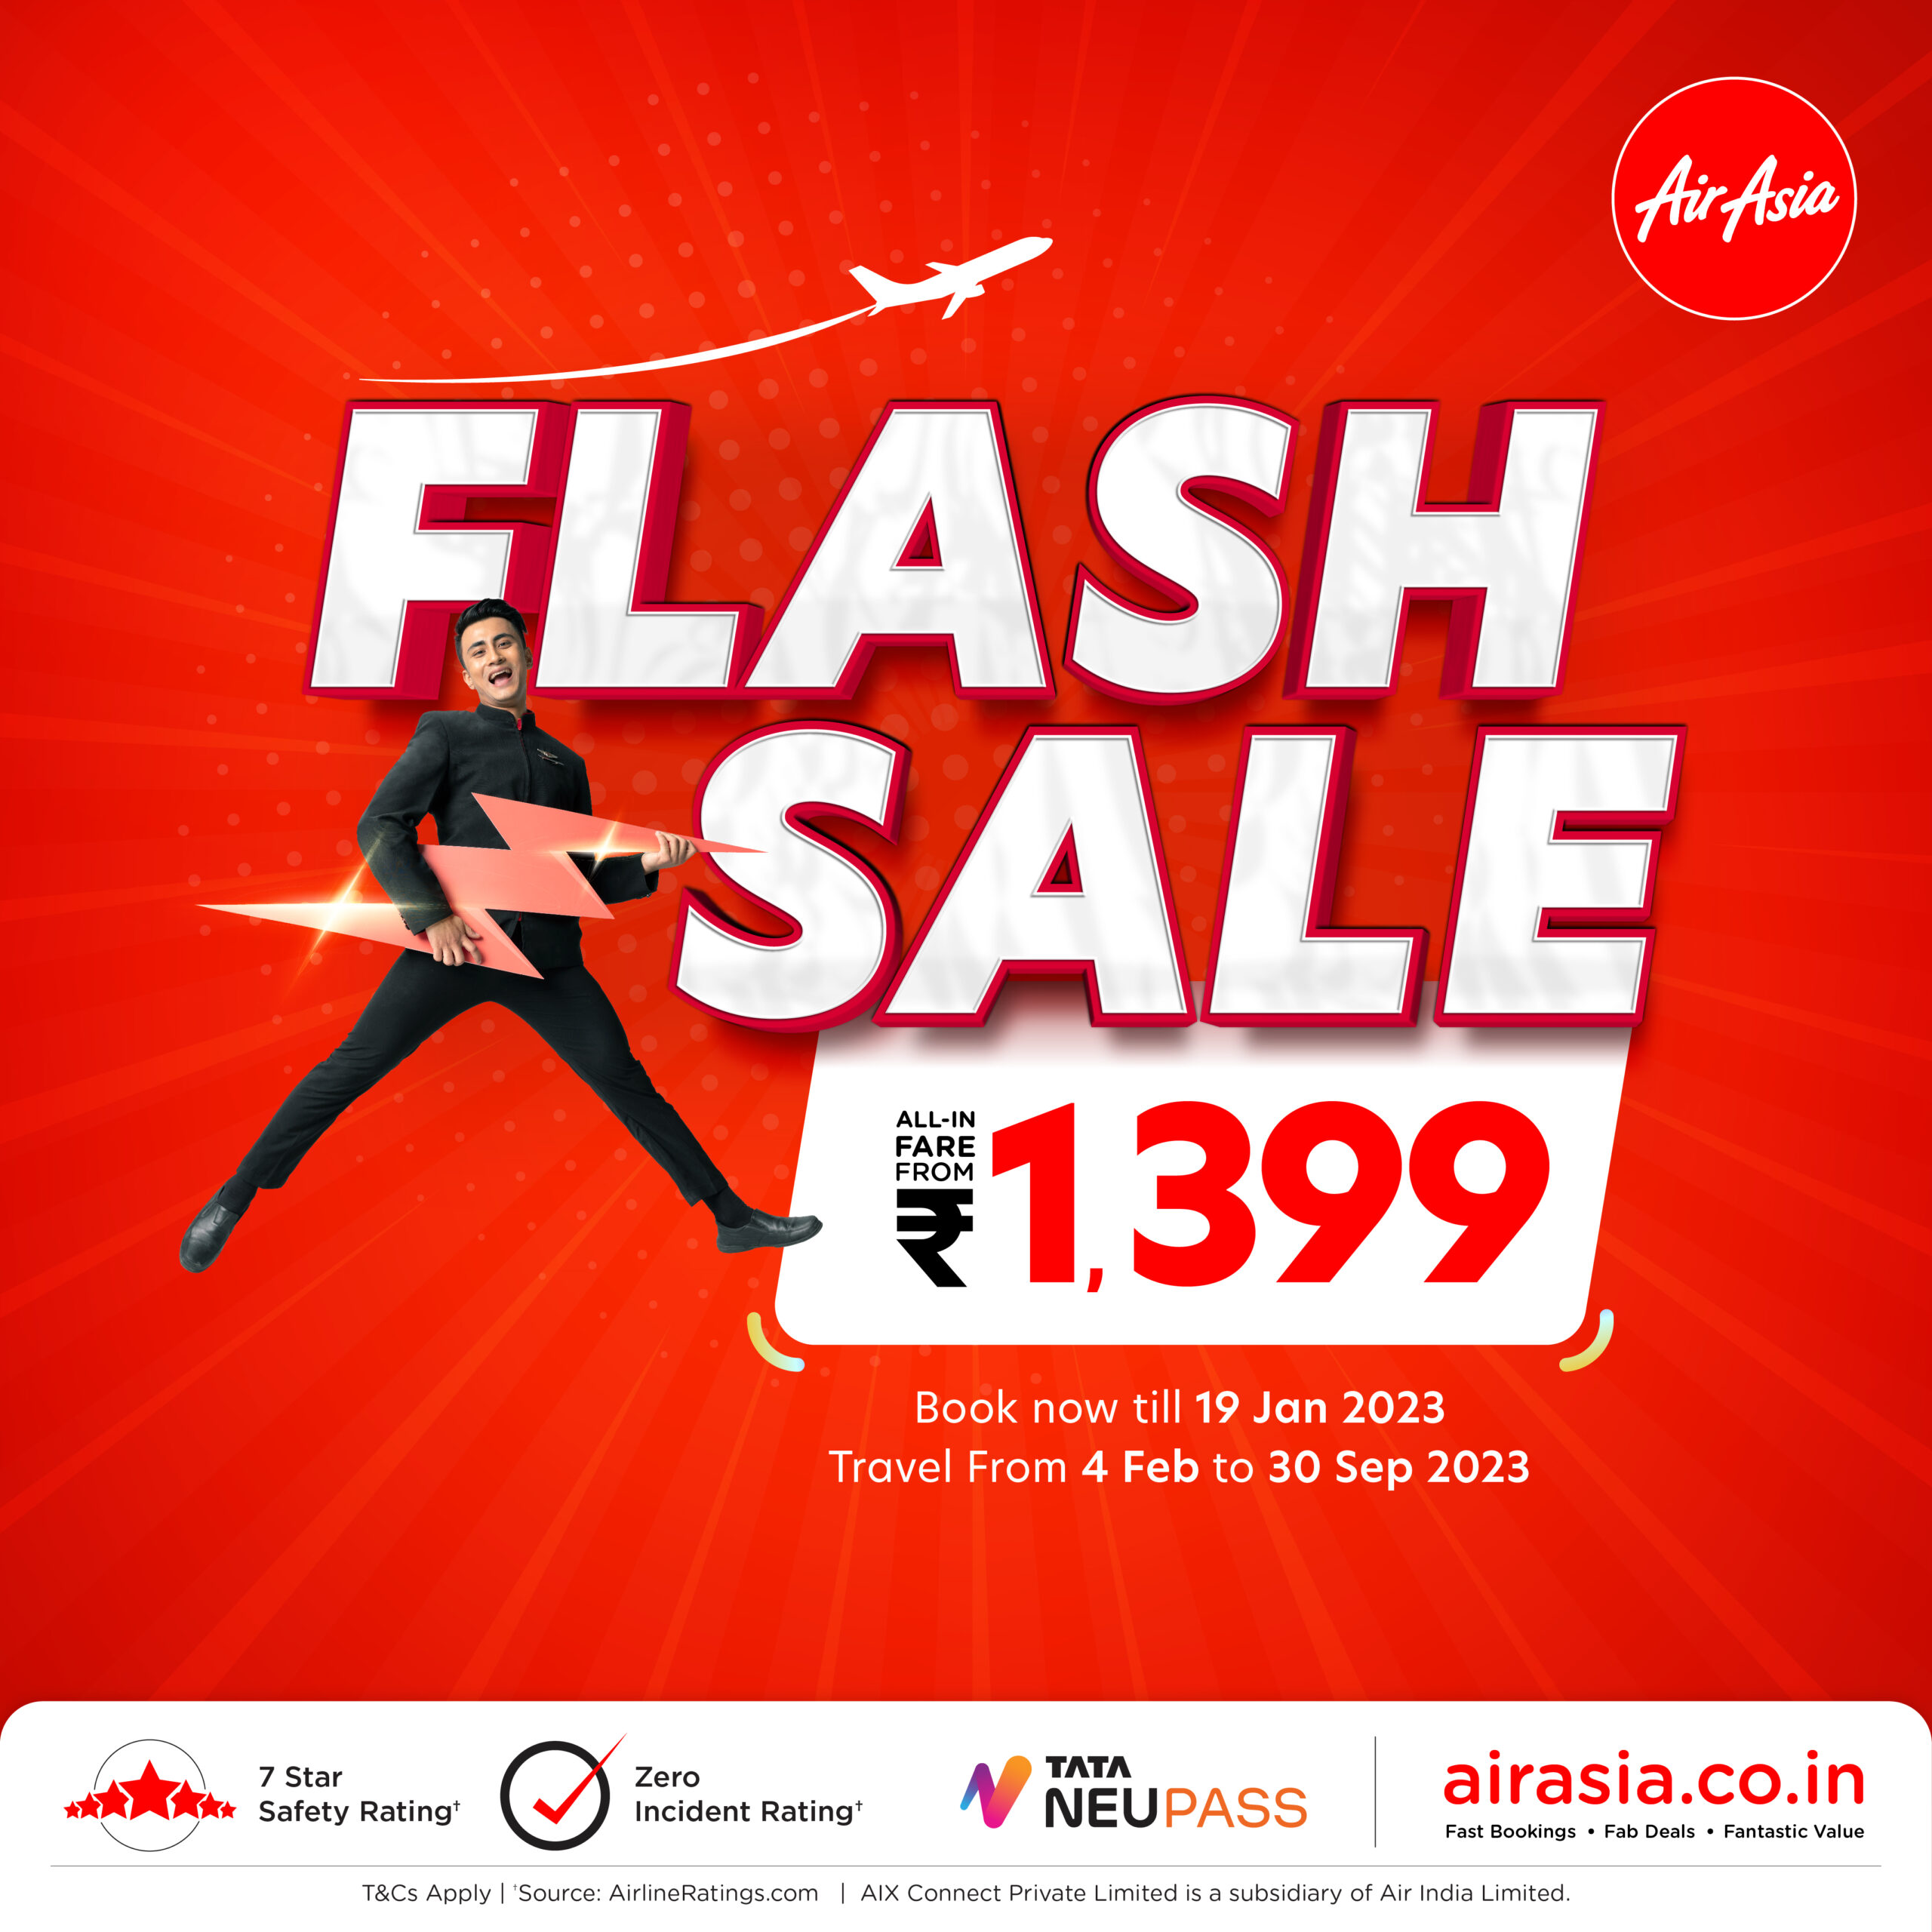 AirAsia India announces Flash Sale with fares starting from INR 1,399